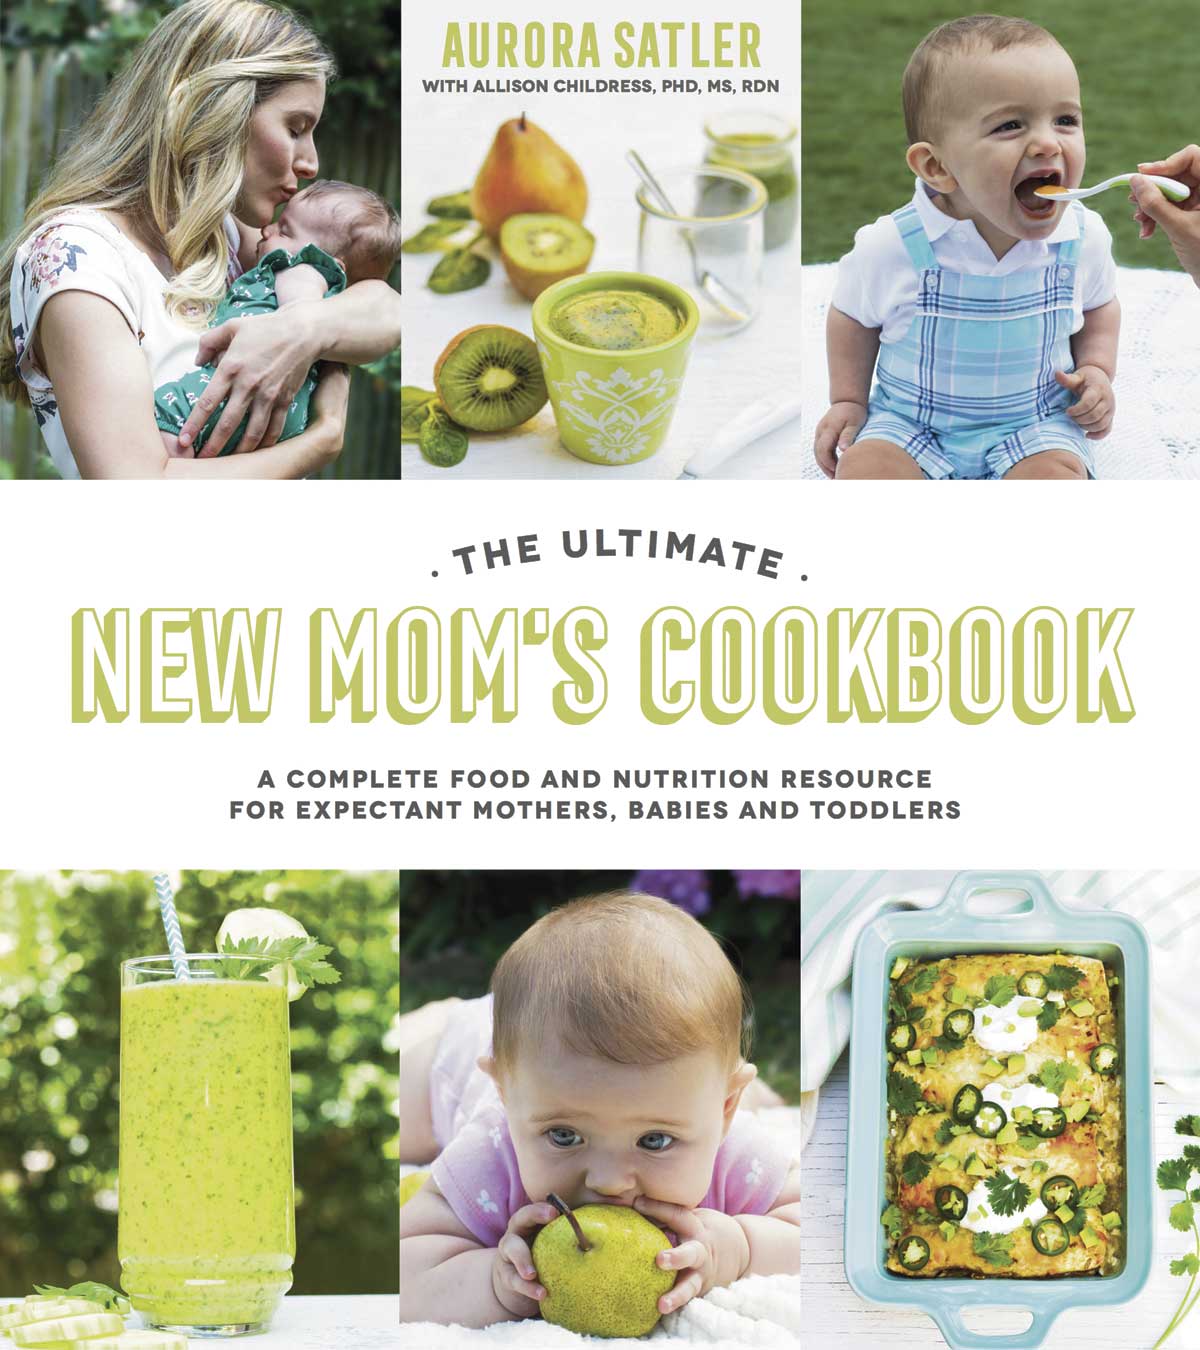 New cookbook aims to make meals easier for pregnant women and new parents